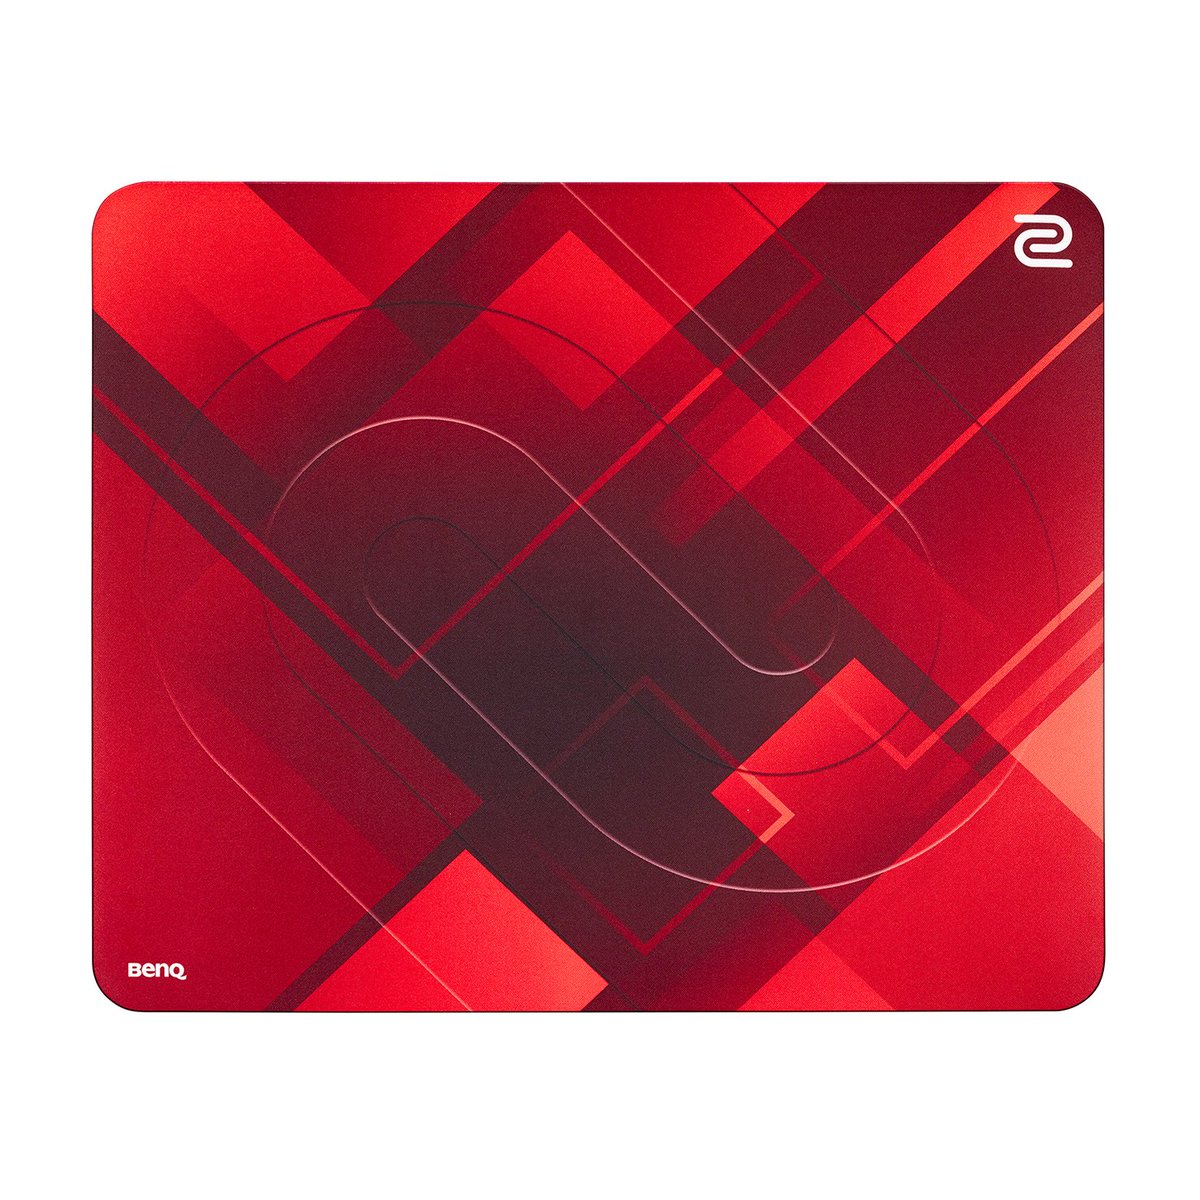 Zowie We Are Introducing The G Sr Se In Red Version Which Maintains The Same Surface Of The Original G Sr Se With A Different Design Product Availability On Selected Stores Will